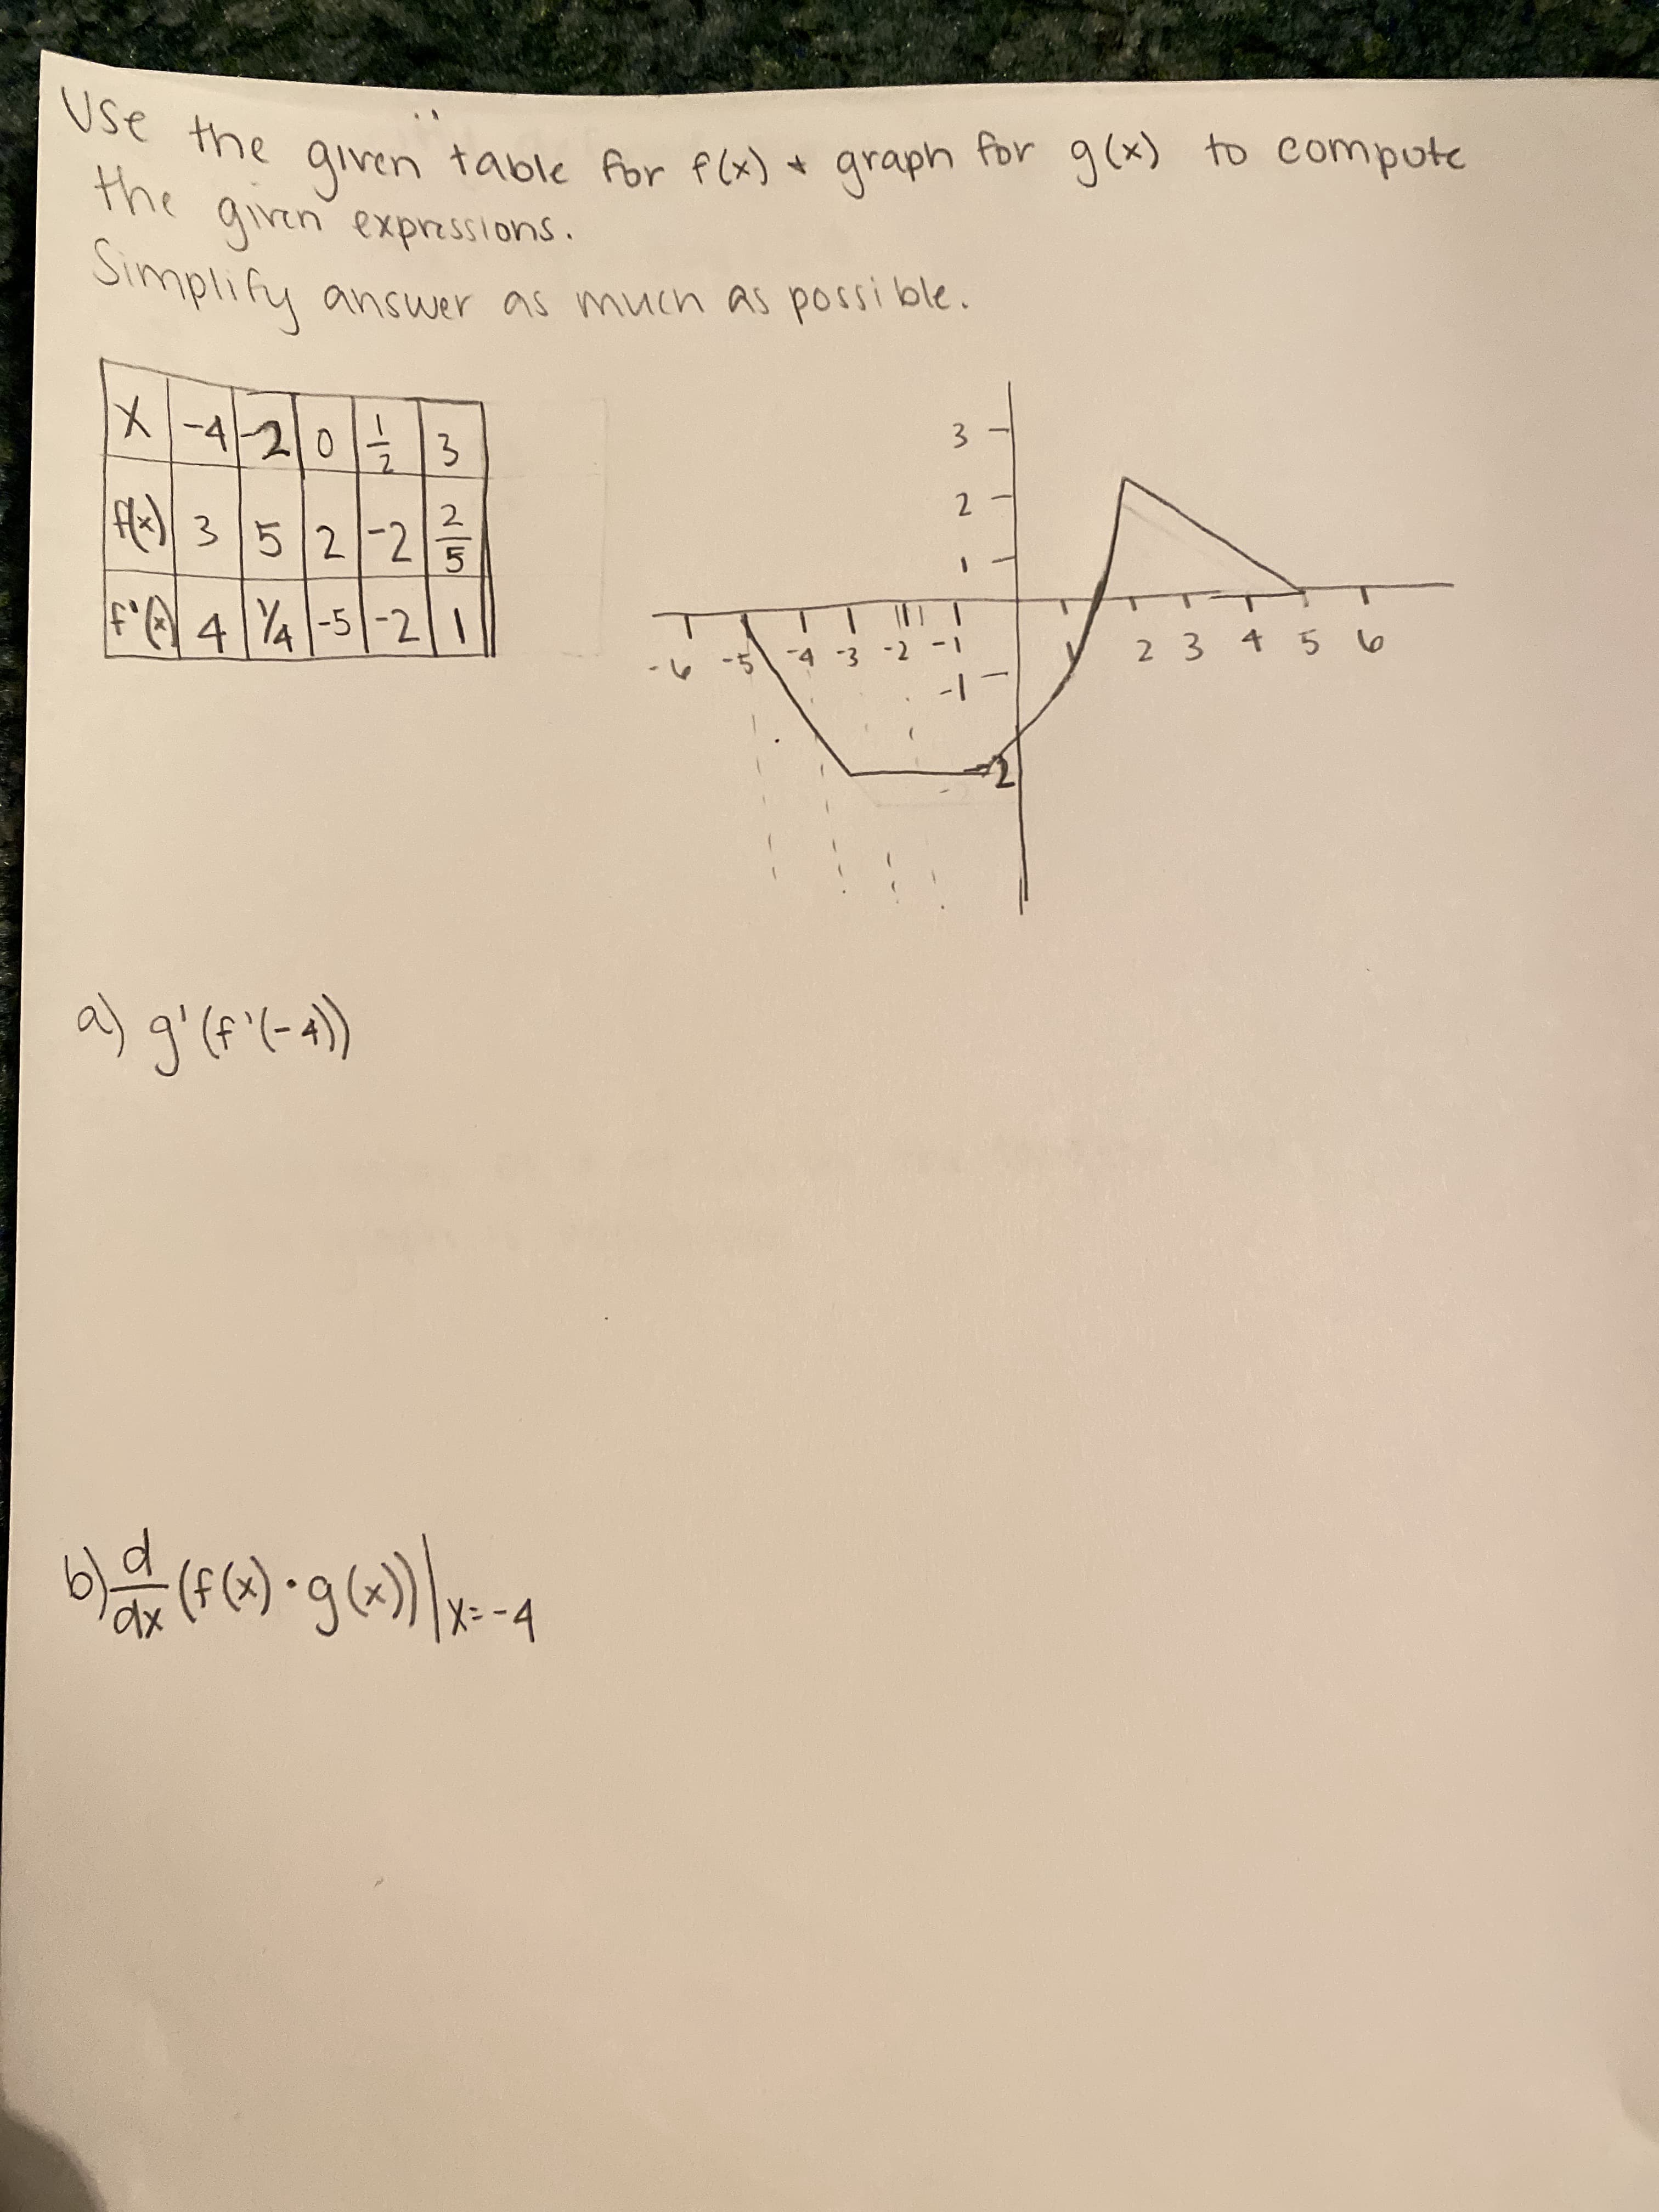 the qiven table Aor Plx) for g(x) to compute
the giren expressions.
Simplify
table for f(x) + for g(x) to compute
graph
4.
answer as much as possi ble.
